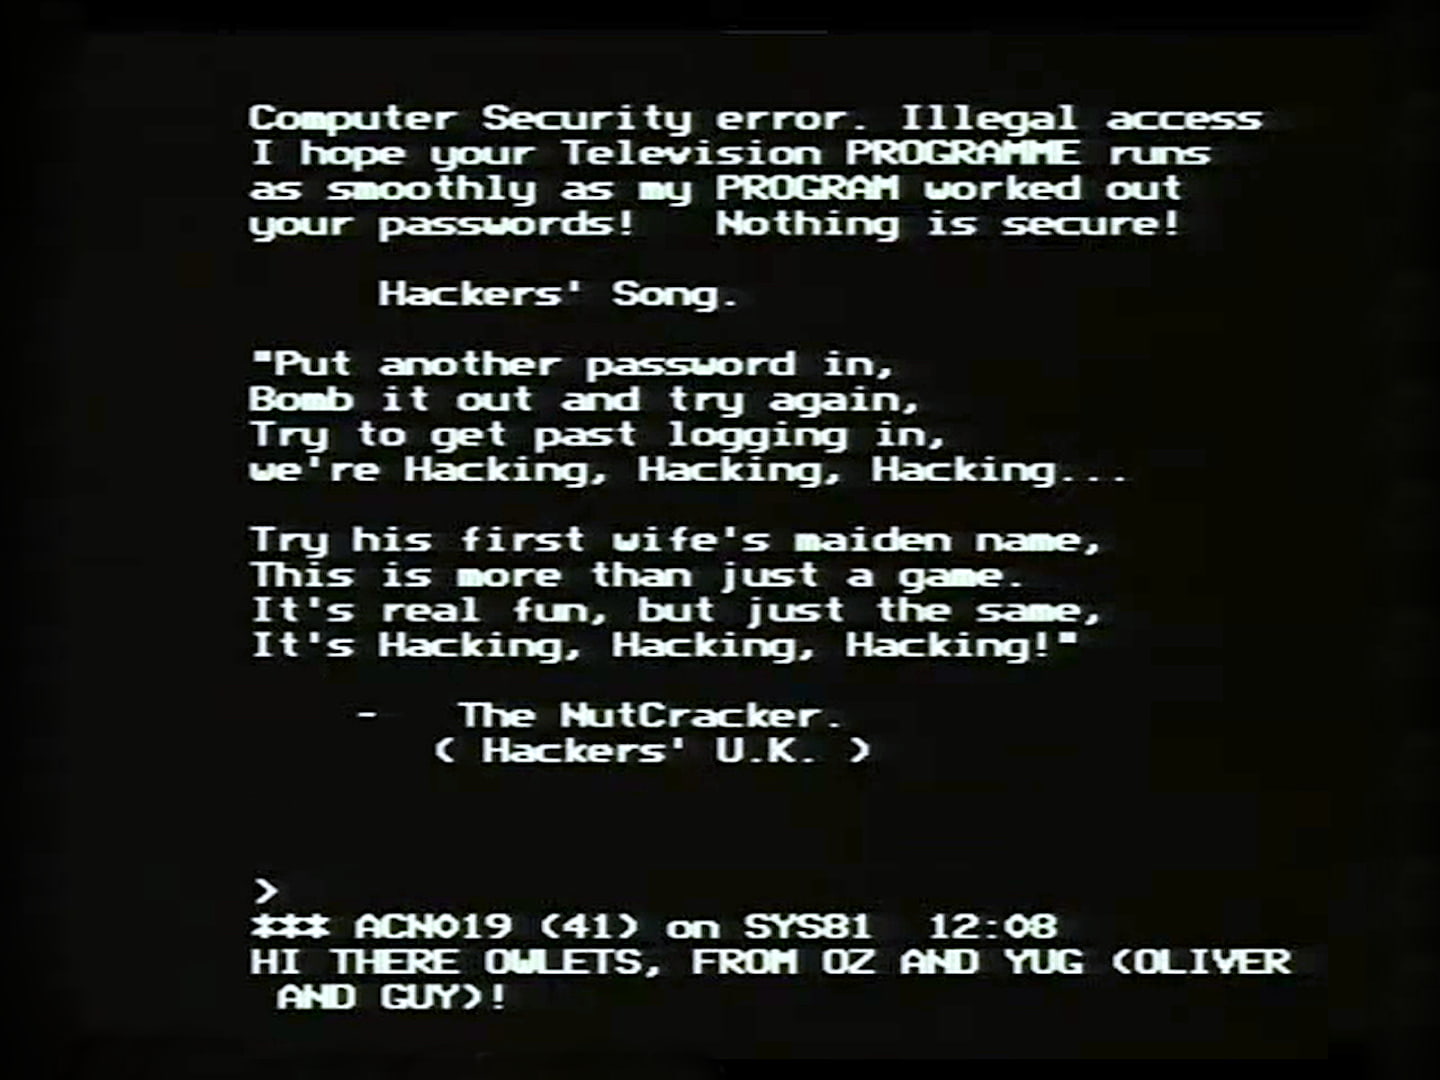 Screenshot of BBC Micro screen with white computer text: Computer Security Error. Illegal access. I hope your Television PROGRAMME runs as smoothly as my PROGRAM worked out your passwords! Nothing is secure! Hackers' Song: Put another password in, Bomb it out and try again, Try to get past logging in, we're Hacking, Hacking, Hacking. Try his first wife's maiden name, This is more than just a game, It's real fun, but just the same, It's Hacking, Hacking, Hacking. --The NutCracker ( Hackers' UK ) HI THERE, OWLETS, FROM OZ AND YUG (OLIVER AND GUY)